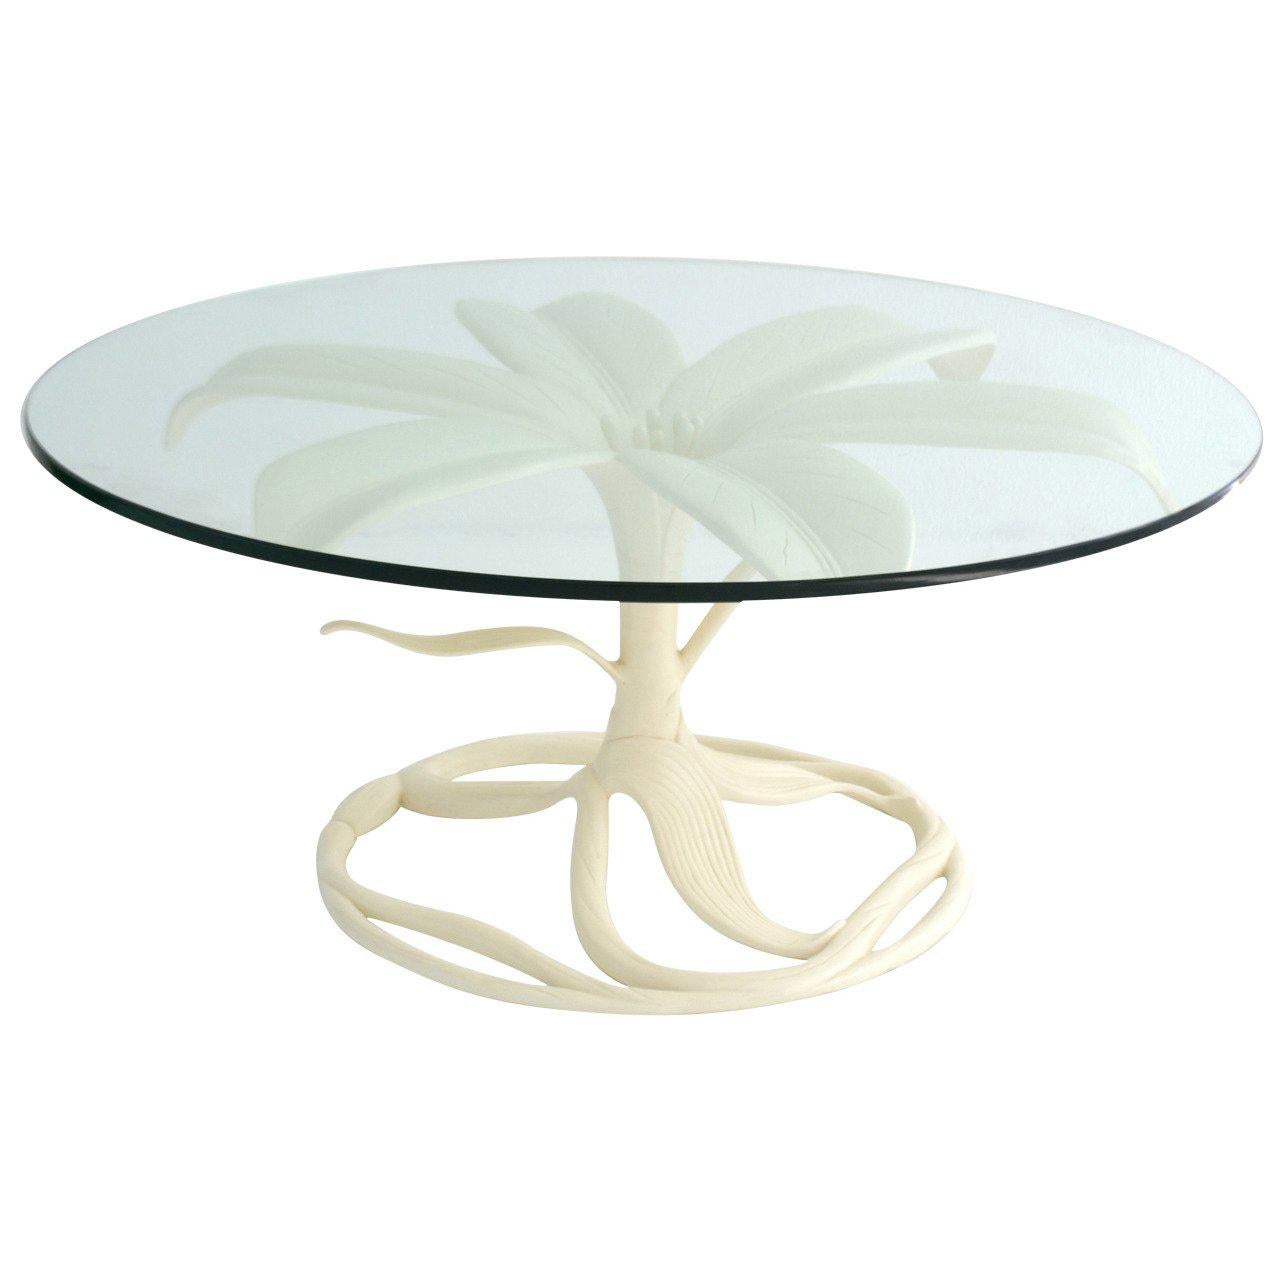 Midcentury White Lacquered, Glass Top Cocktail Table by Arthur Court For Sale